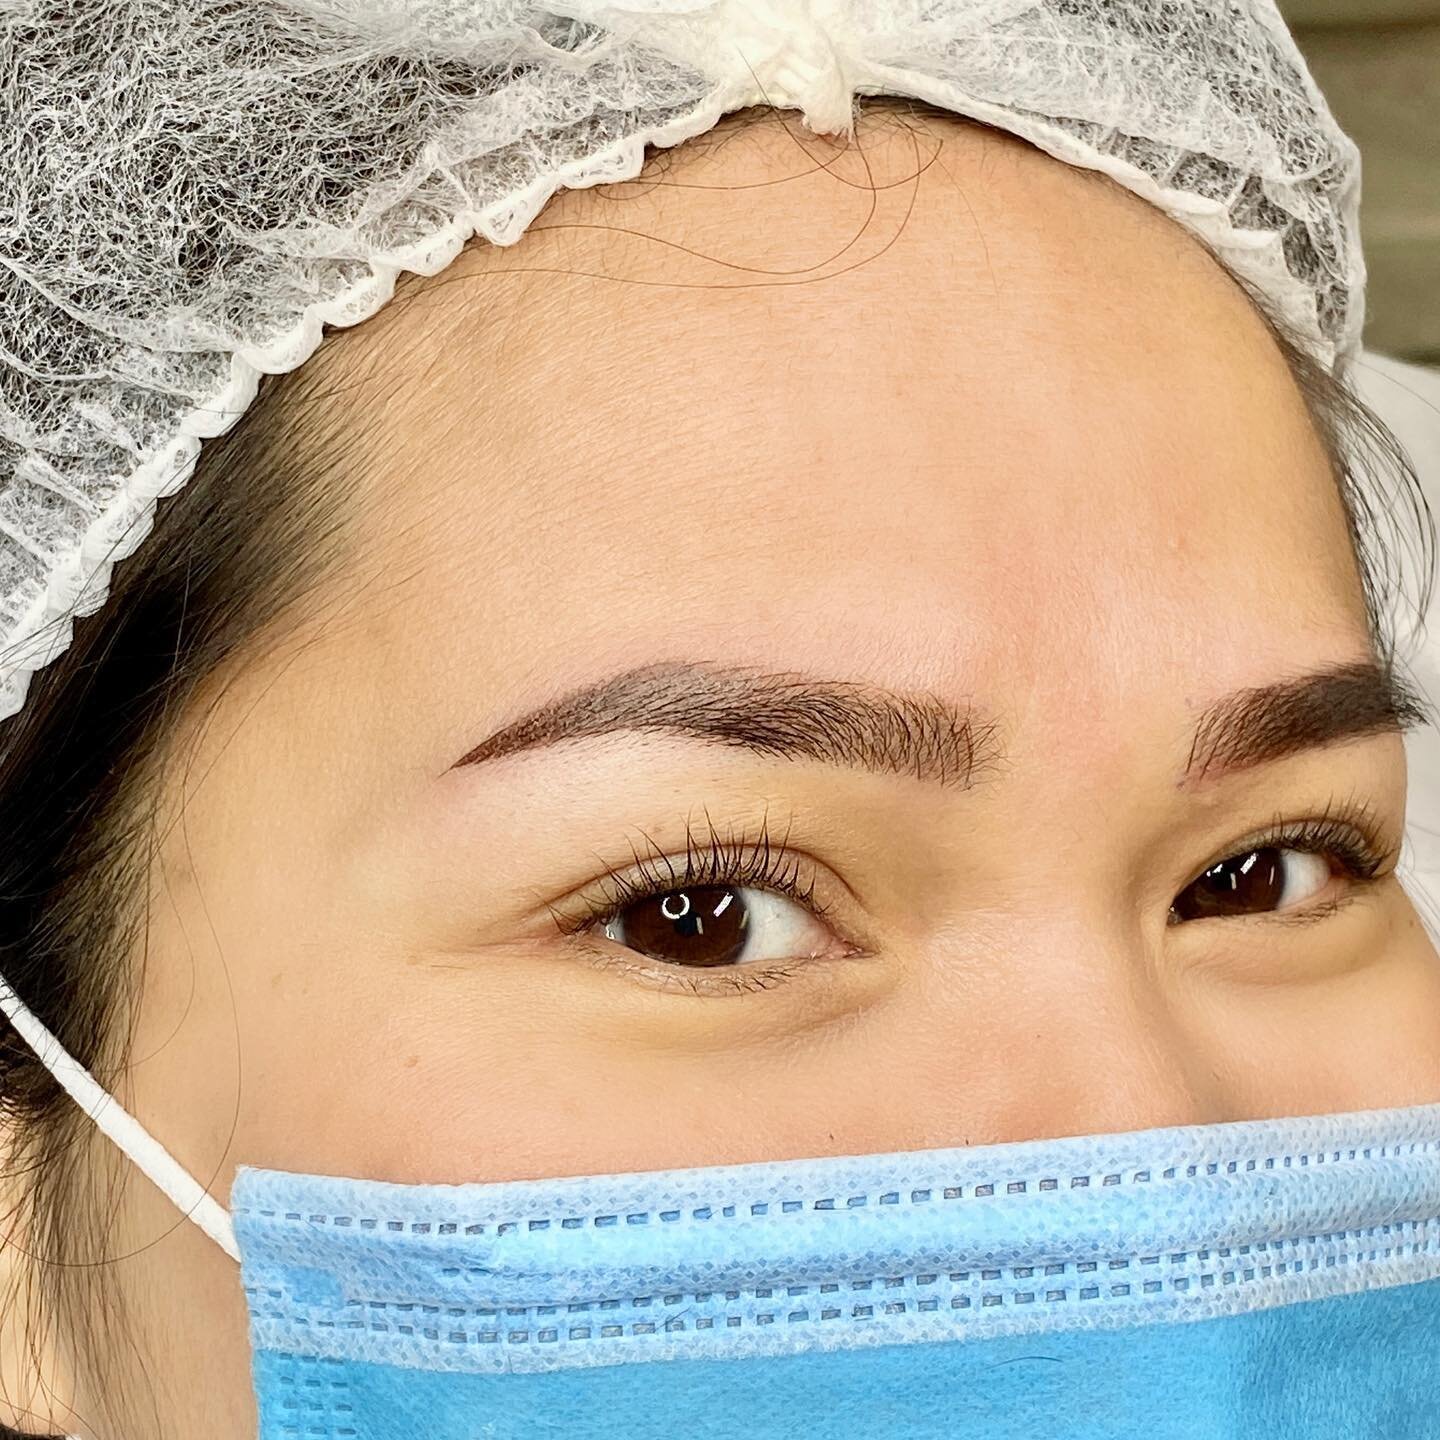 Microblading + shading. Plus lash lift #lashlift for this beautiful lady. Color will be lighter 40% to 60% of it after heal. 
#microblading #shading #microshading #hairstokes #ombrepowderbrows #browshaping #browsonfleek #brows #browartist #tattooarti